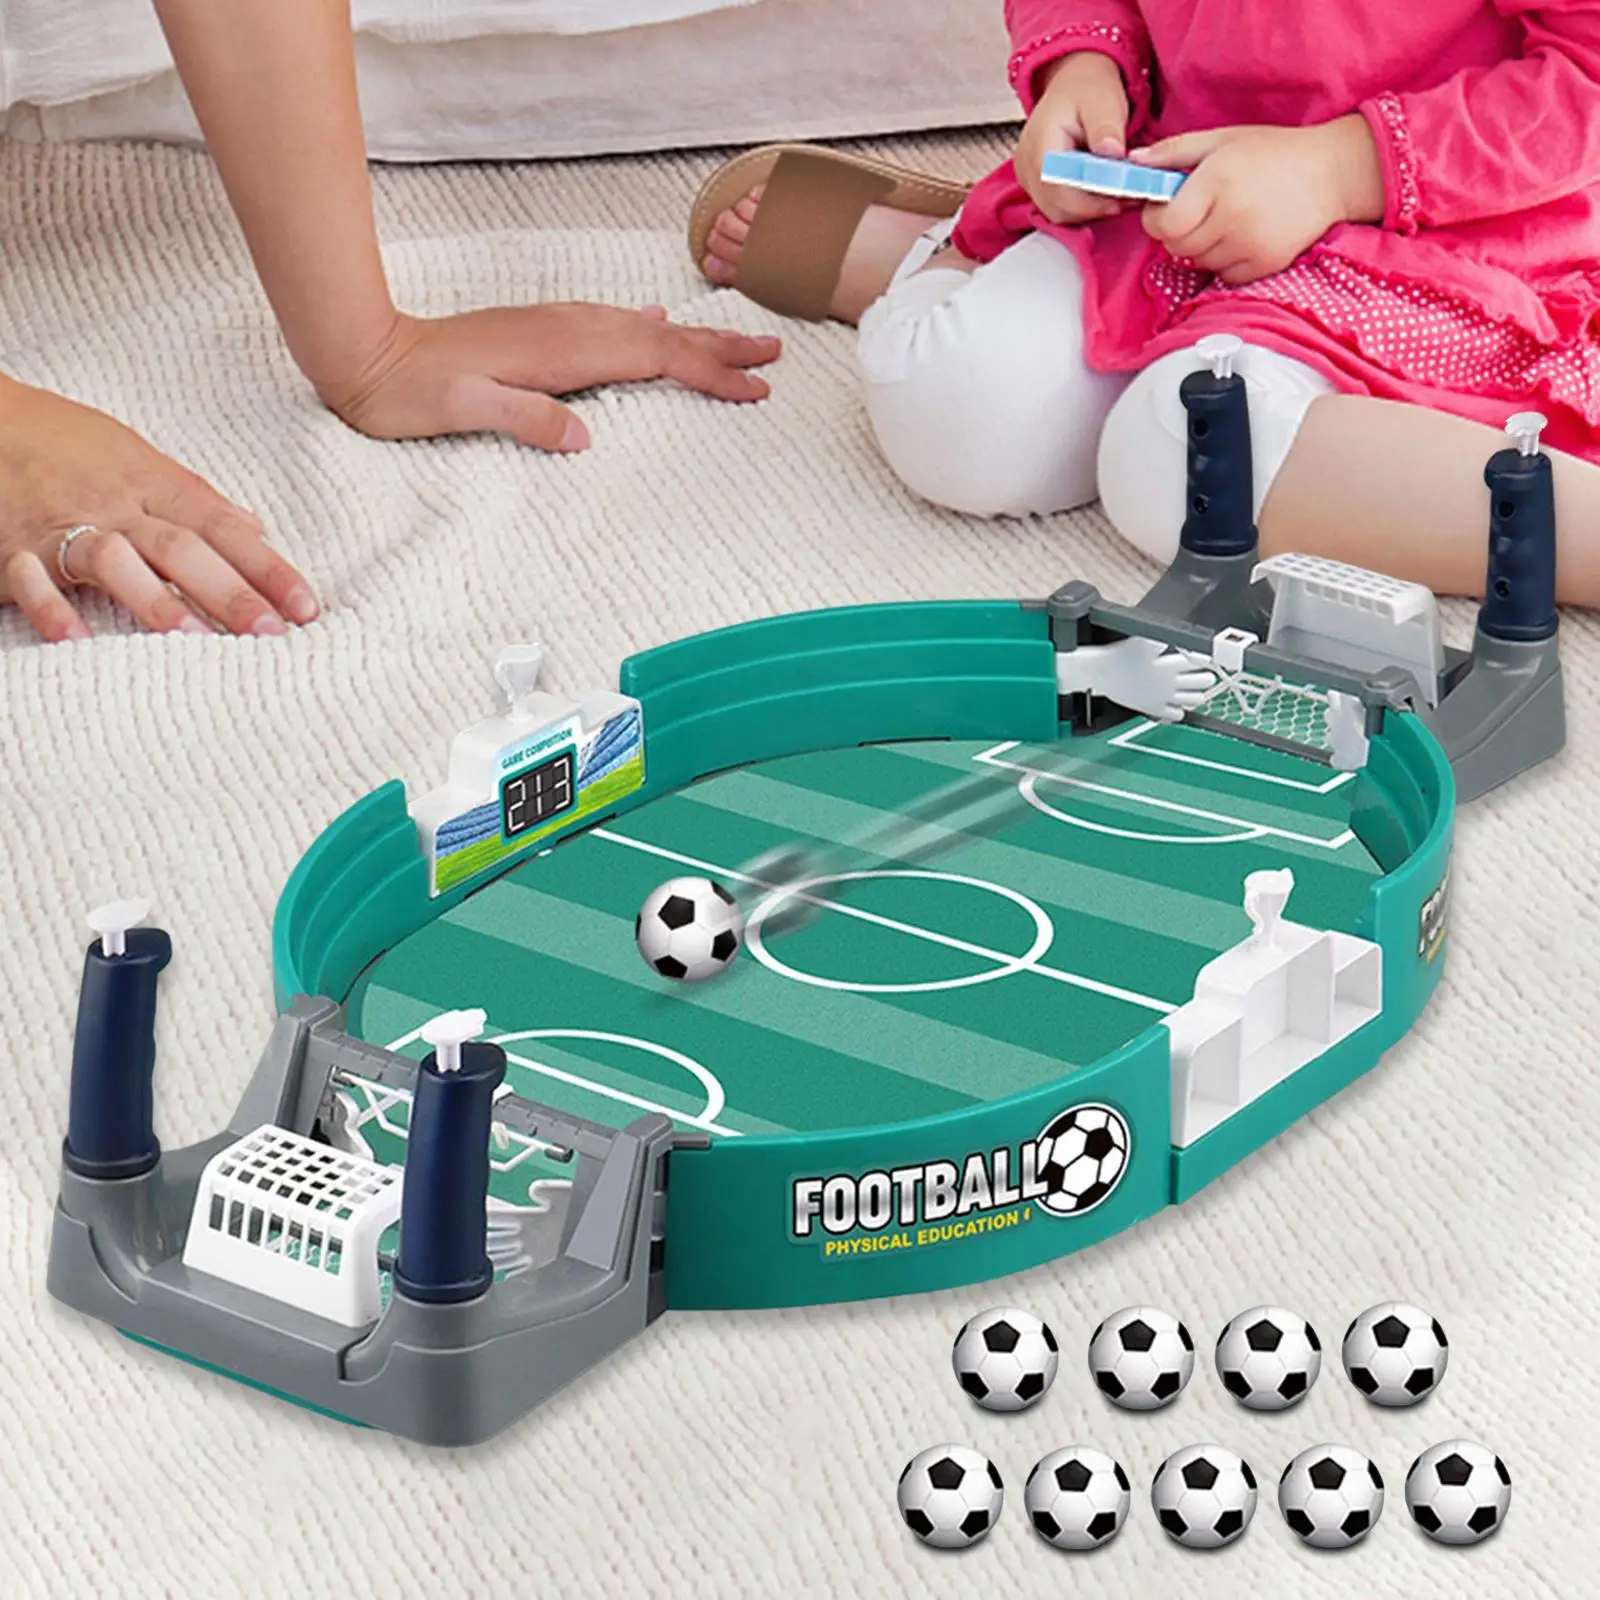 Table Soccer Game Parent Child Toys for Entertainment Two players